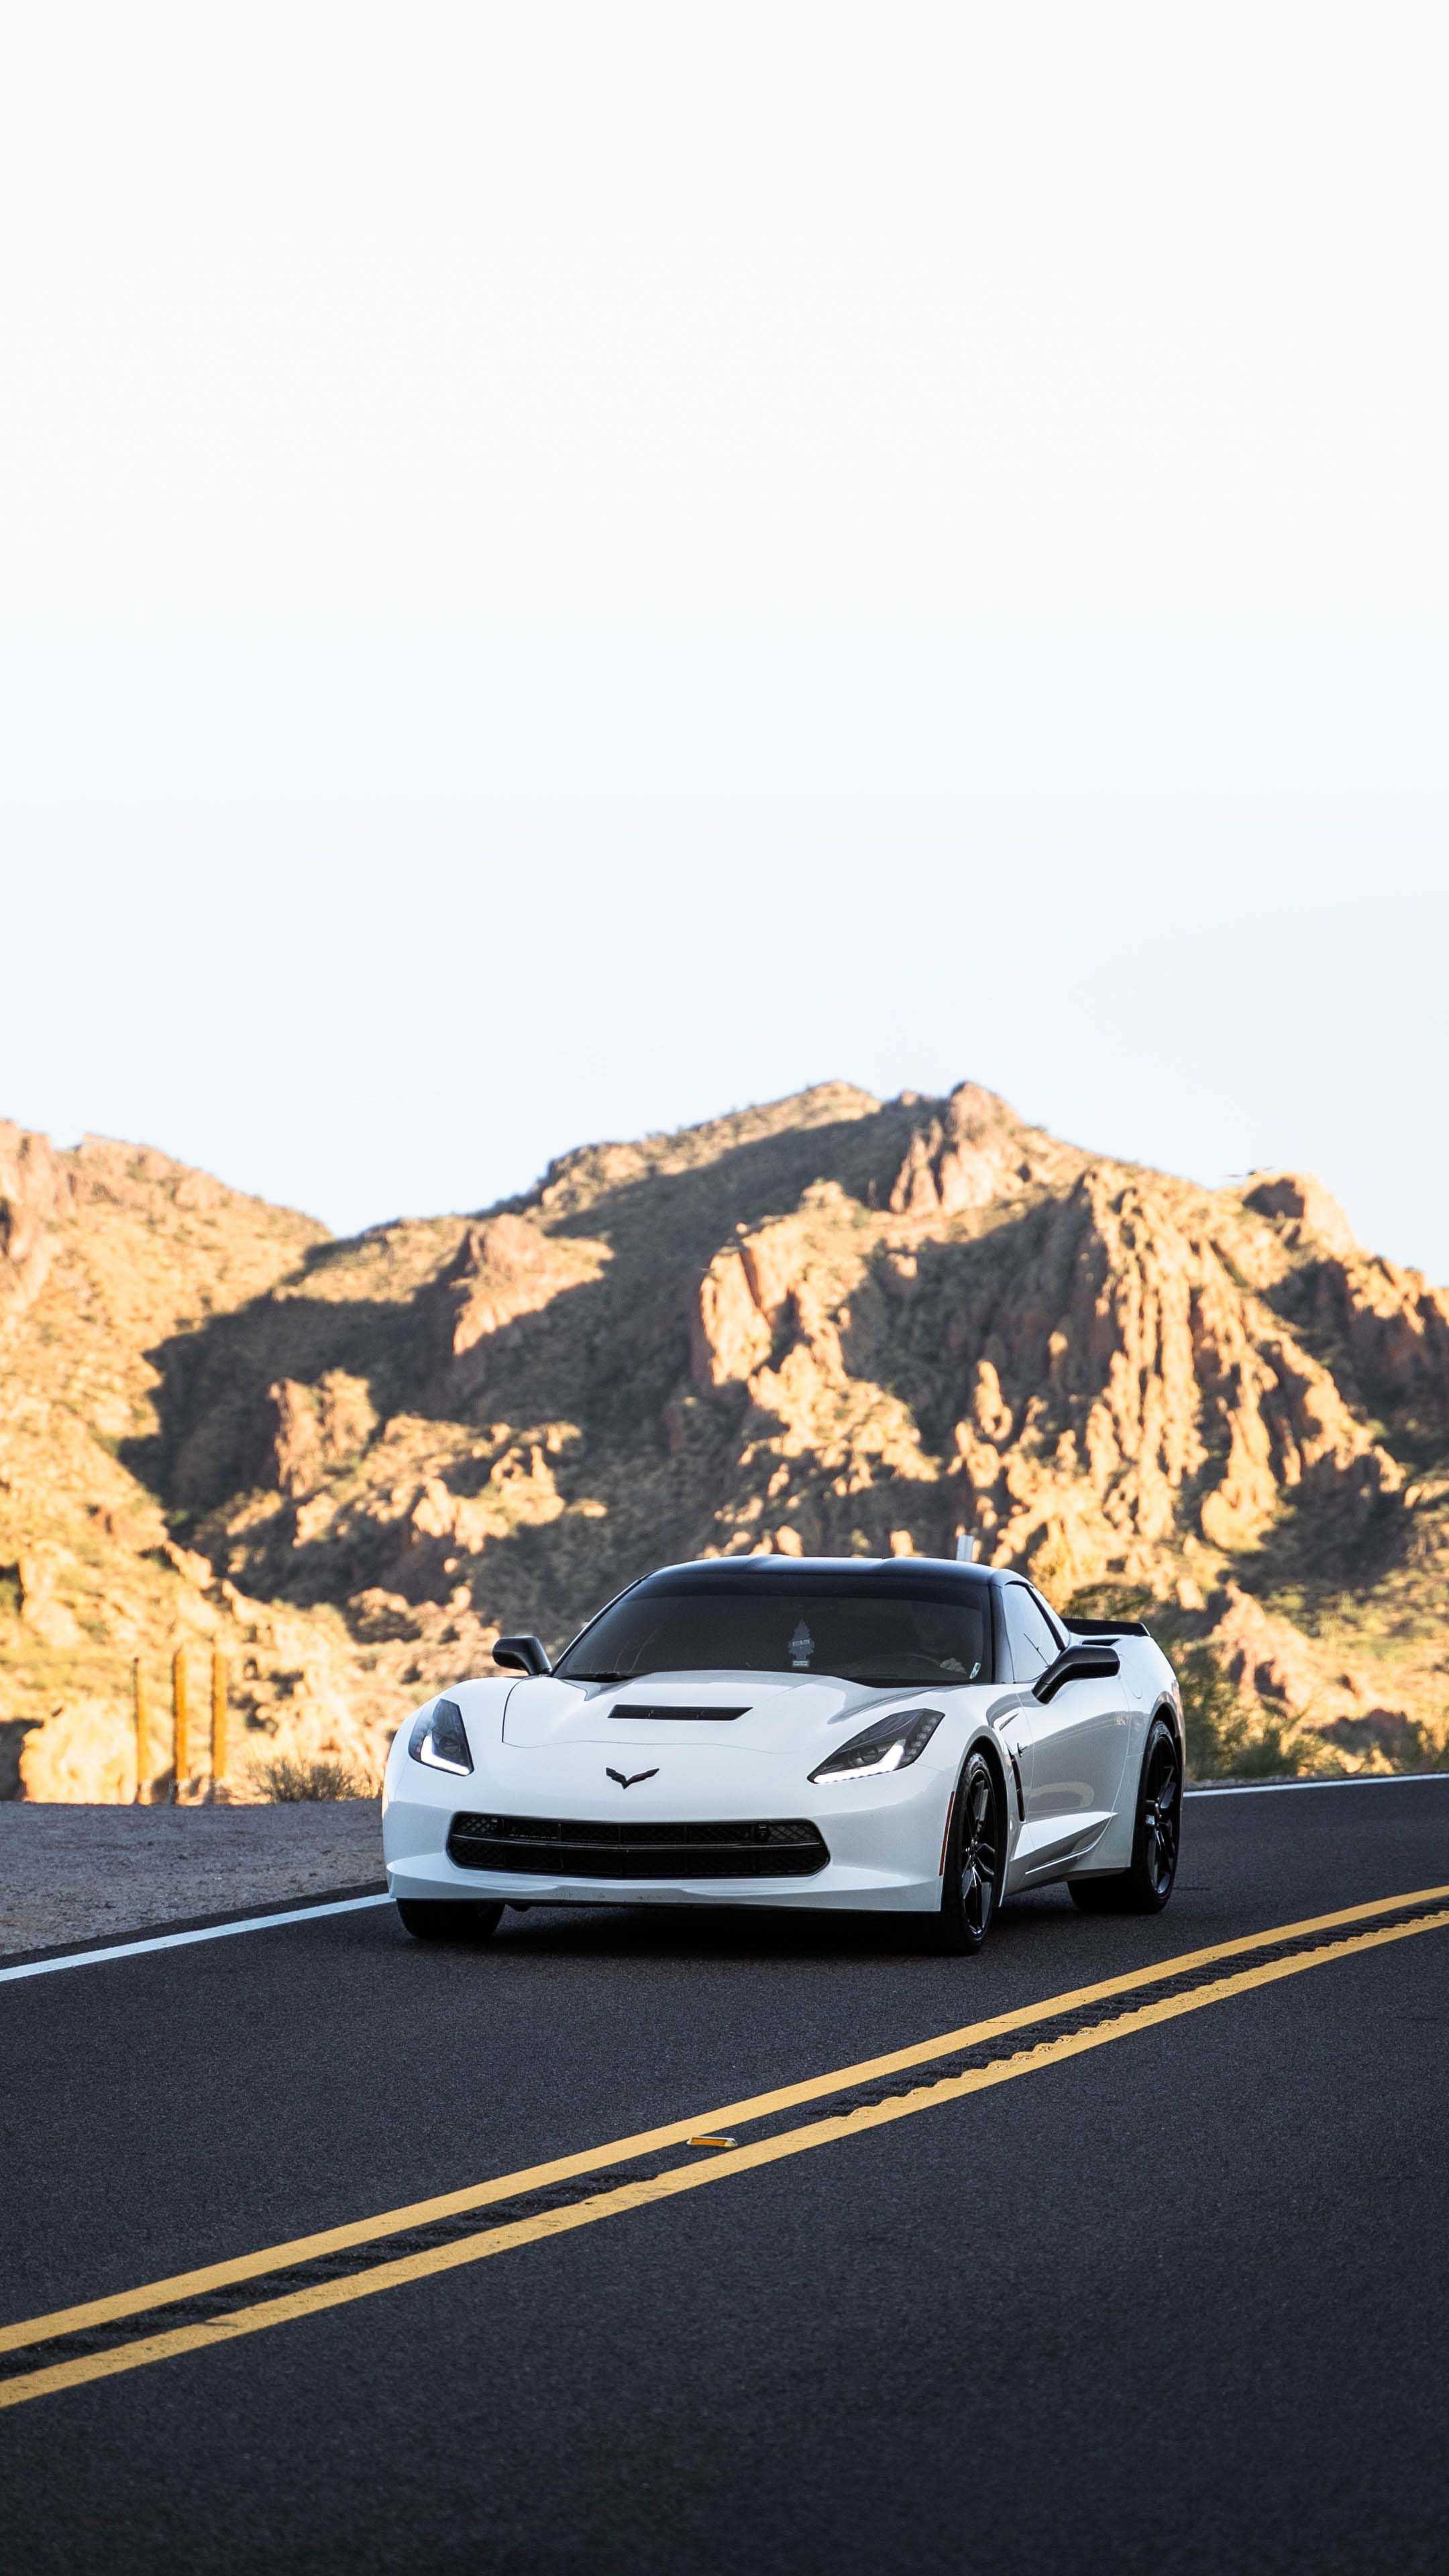 Corvette: The seventh generation of the Chevrolet sports car, ZR1 C7, A production supercar, An American vehicle. 2160x3840 4K Background.